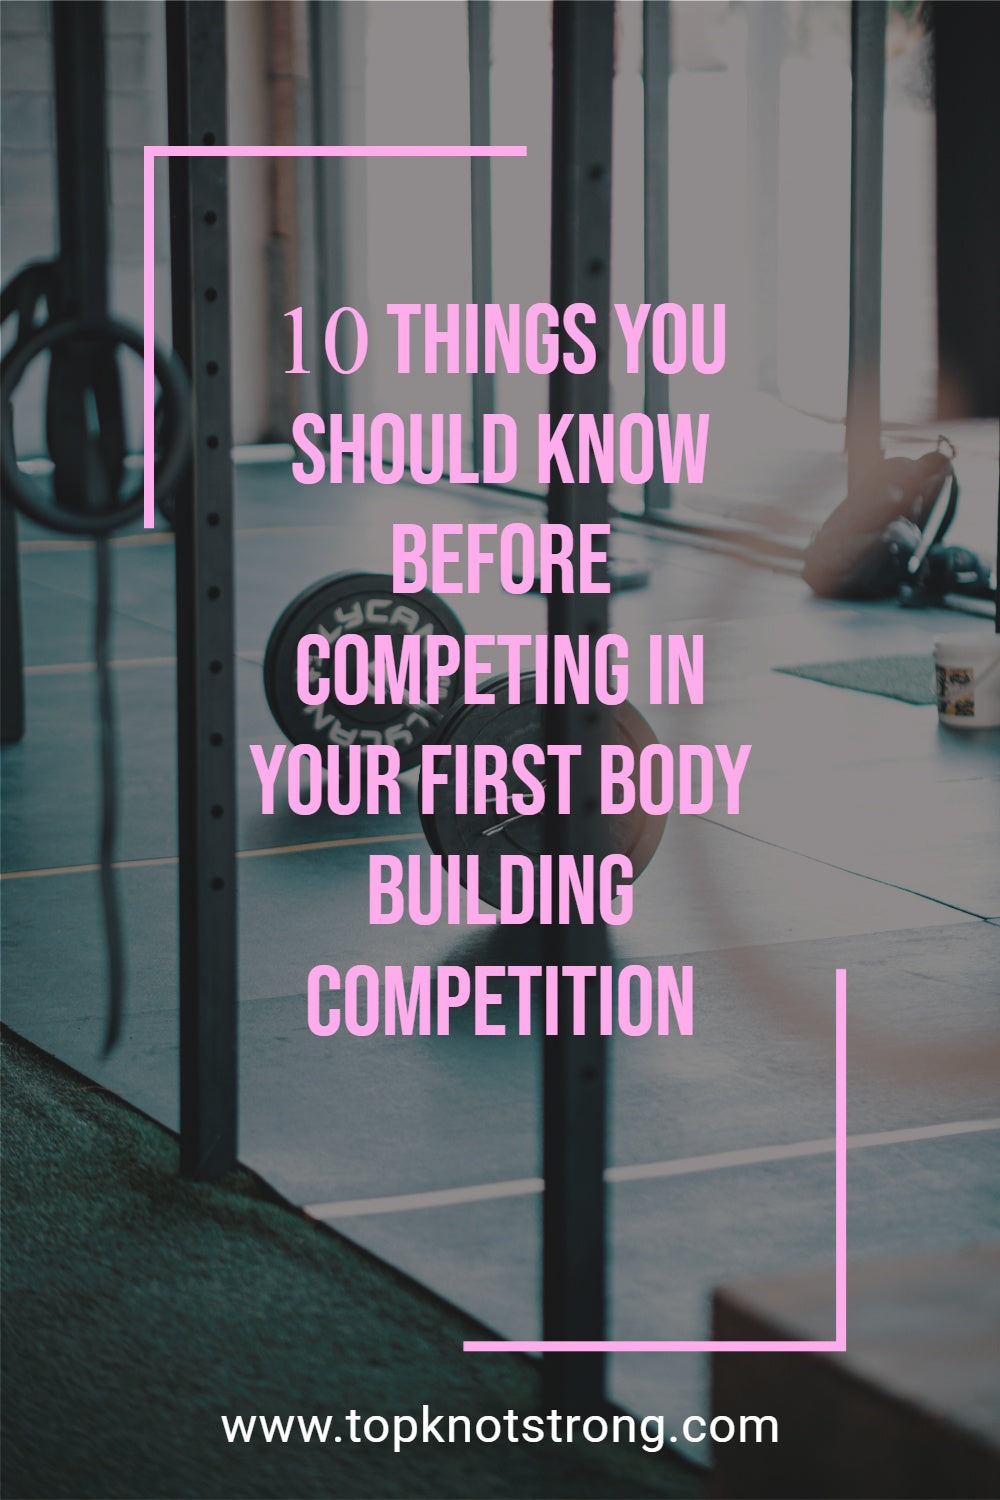 10 Things You Should Know Before Competing In Your First Body Building Competition